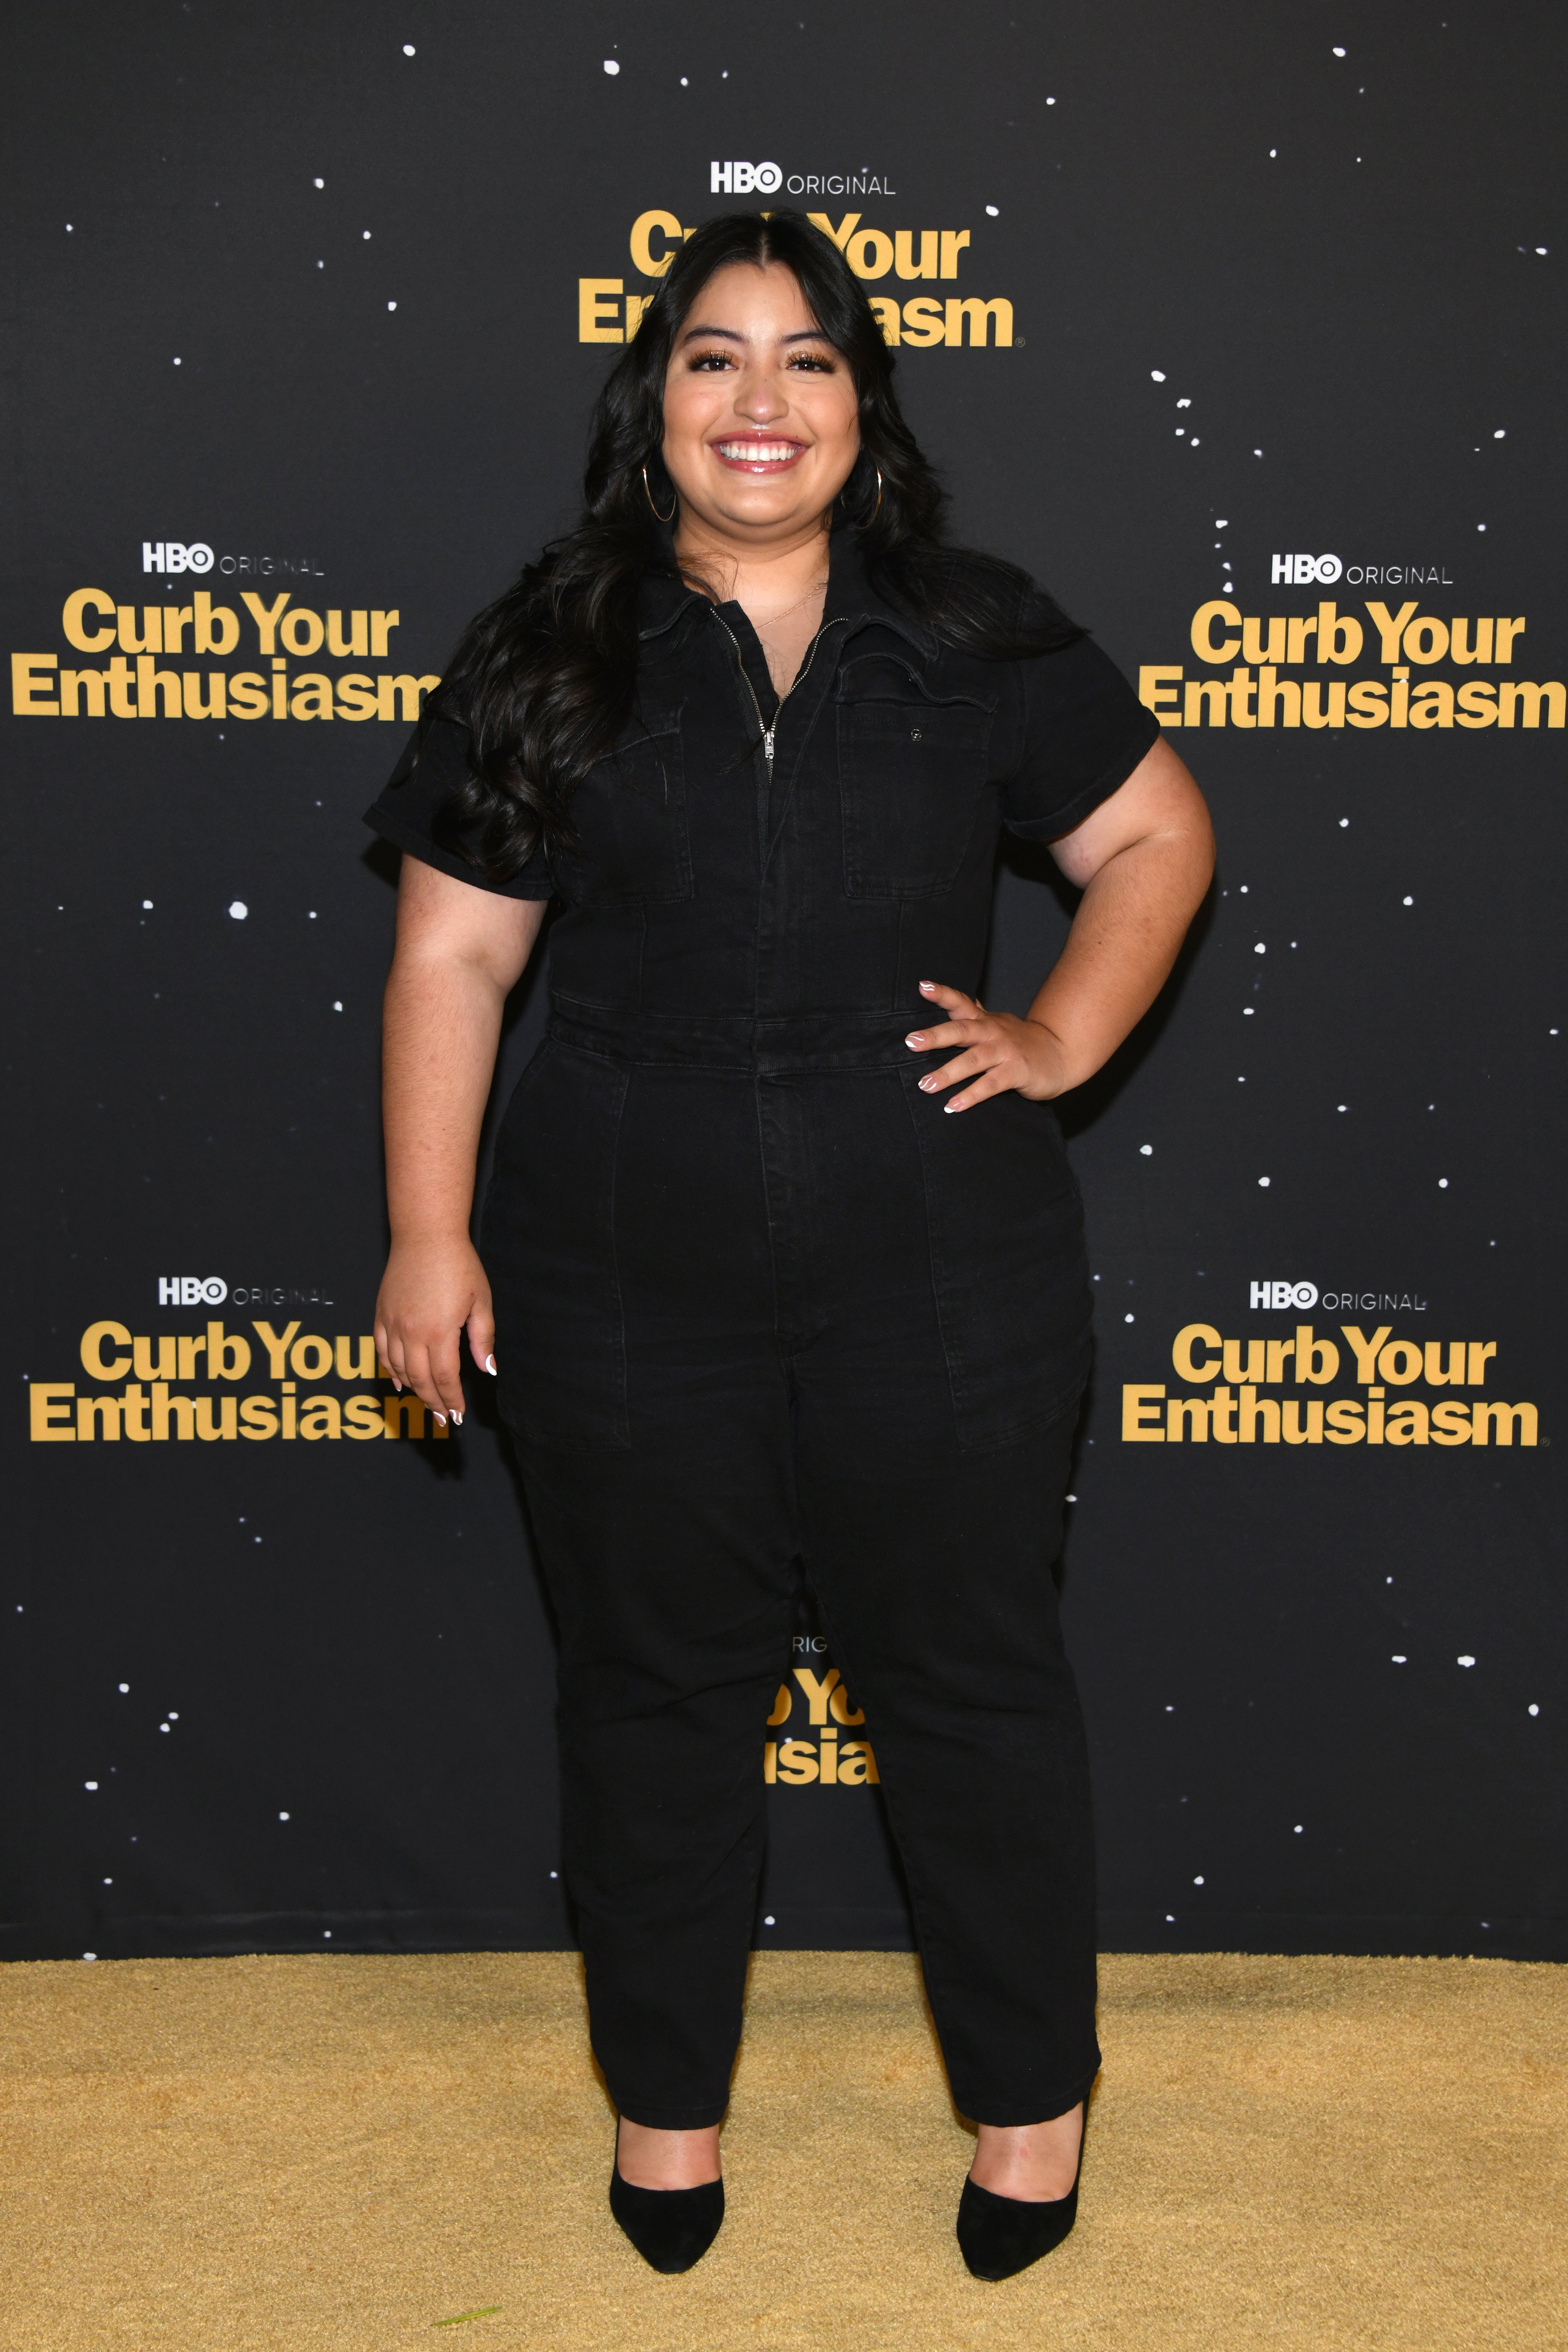 Keyla Monterroso Mejia attends the premiere of HBO's "Curb Your Enthusiasm" at Paramount Pictures Studios on October 19, 2021, in Los Angeles, California. | Source: Getty Images